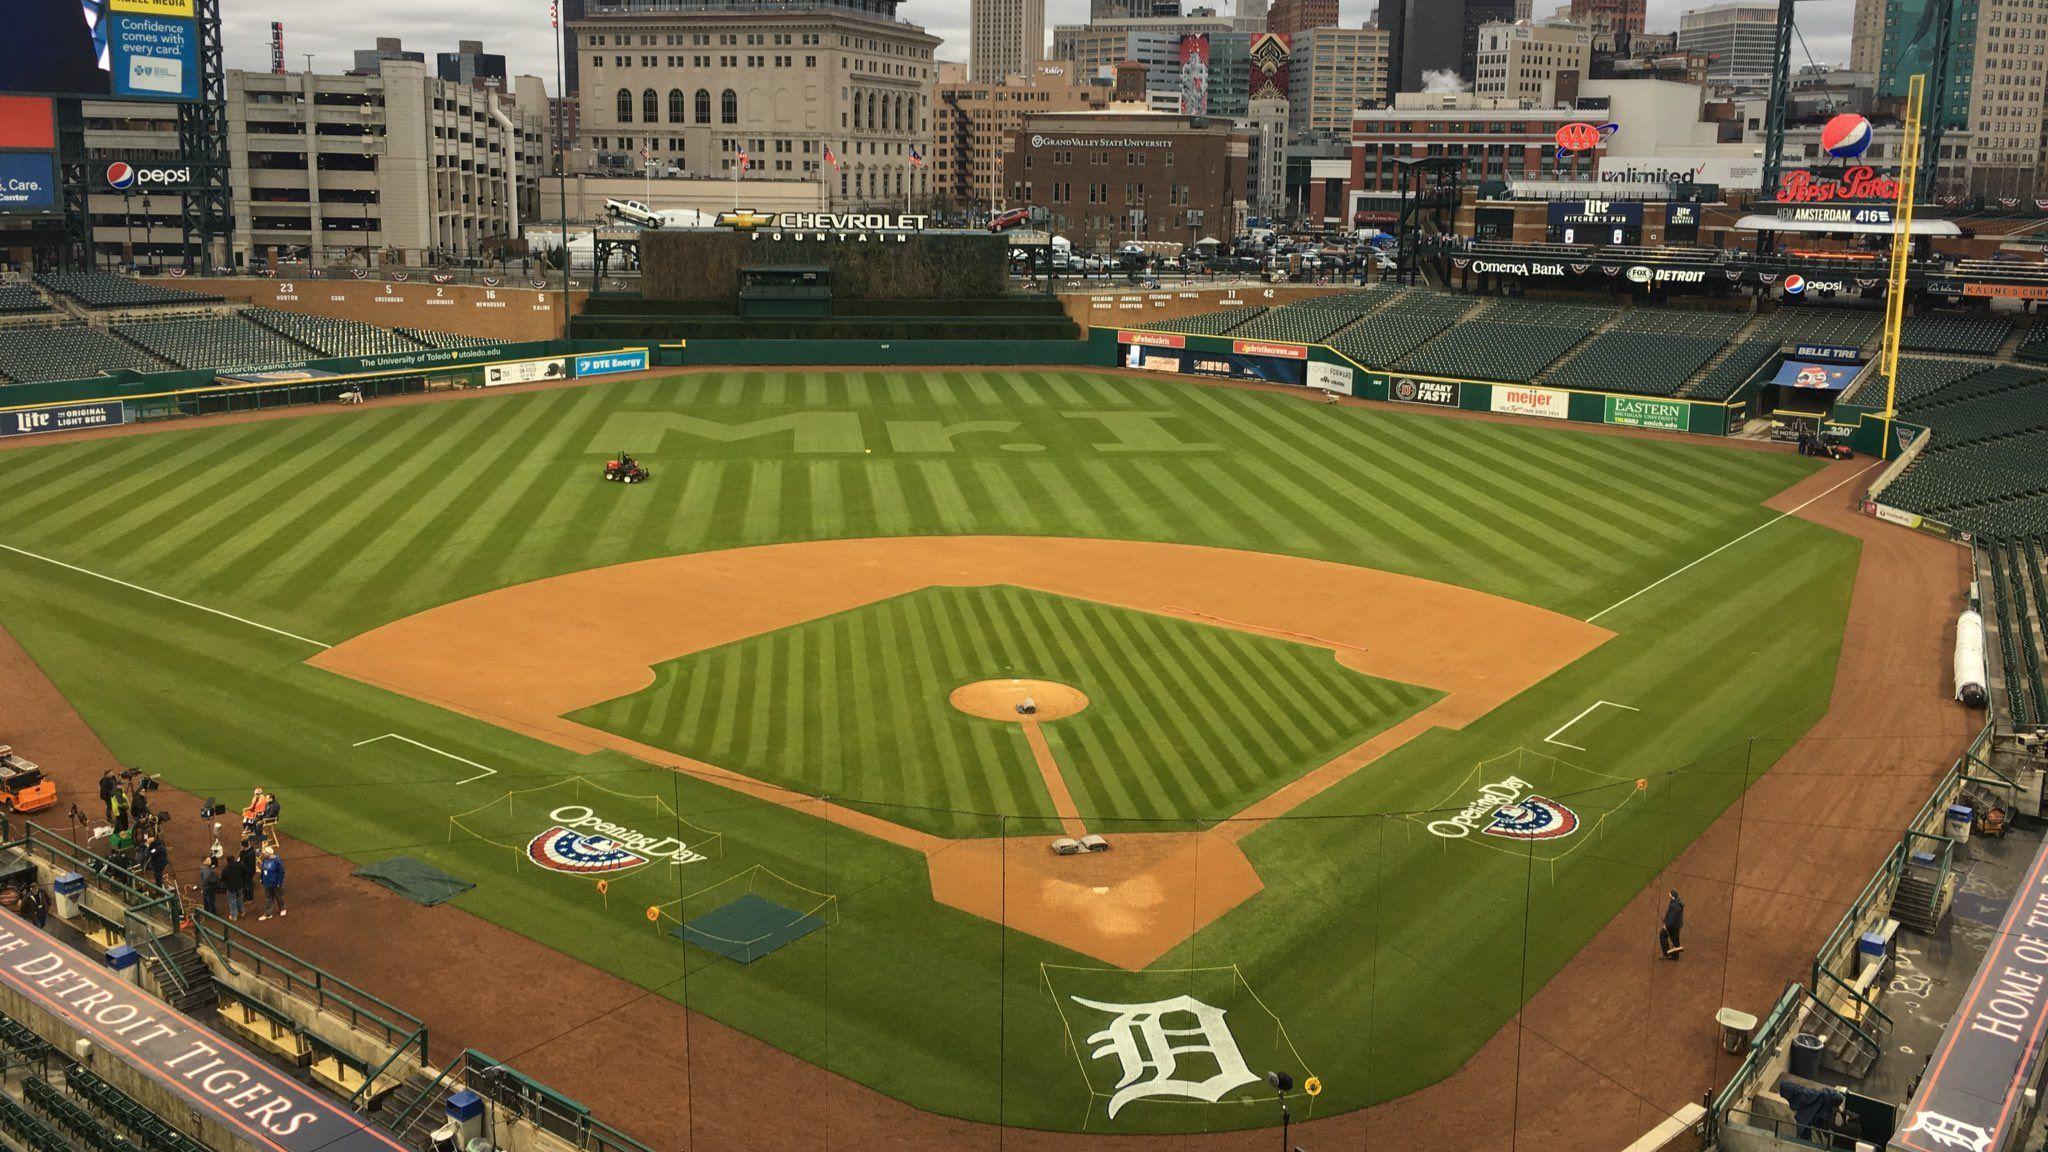 Tigers 2018 payroll may be down 30% or more. Crain's Detroit Business